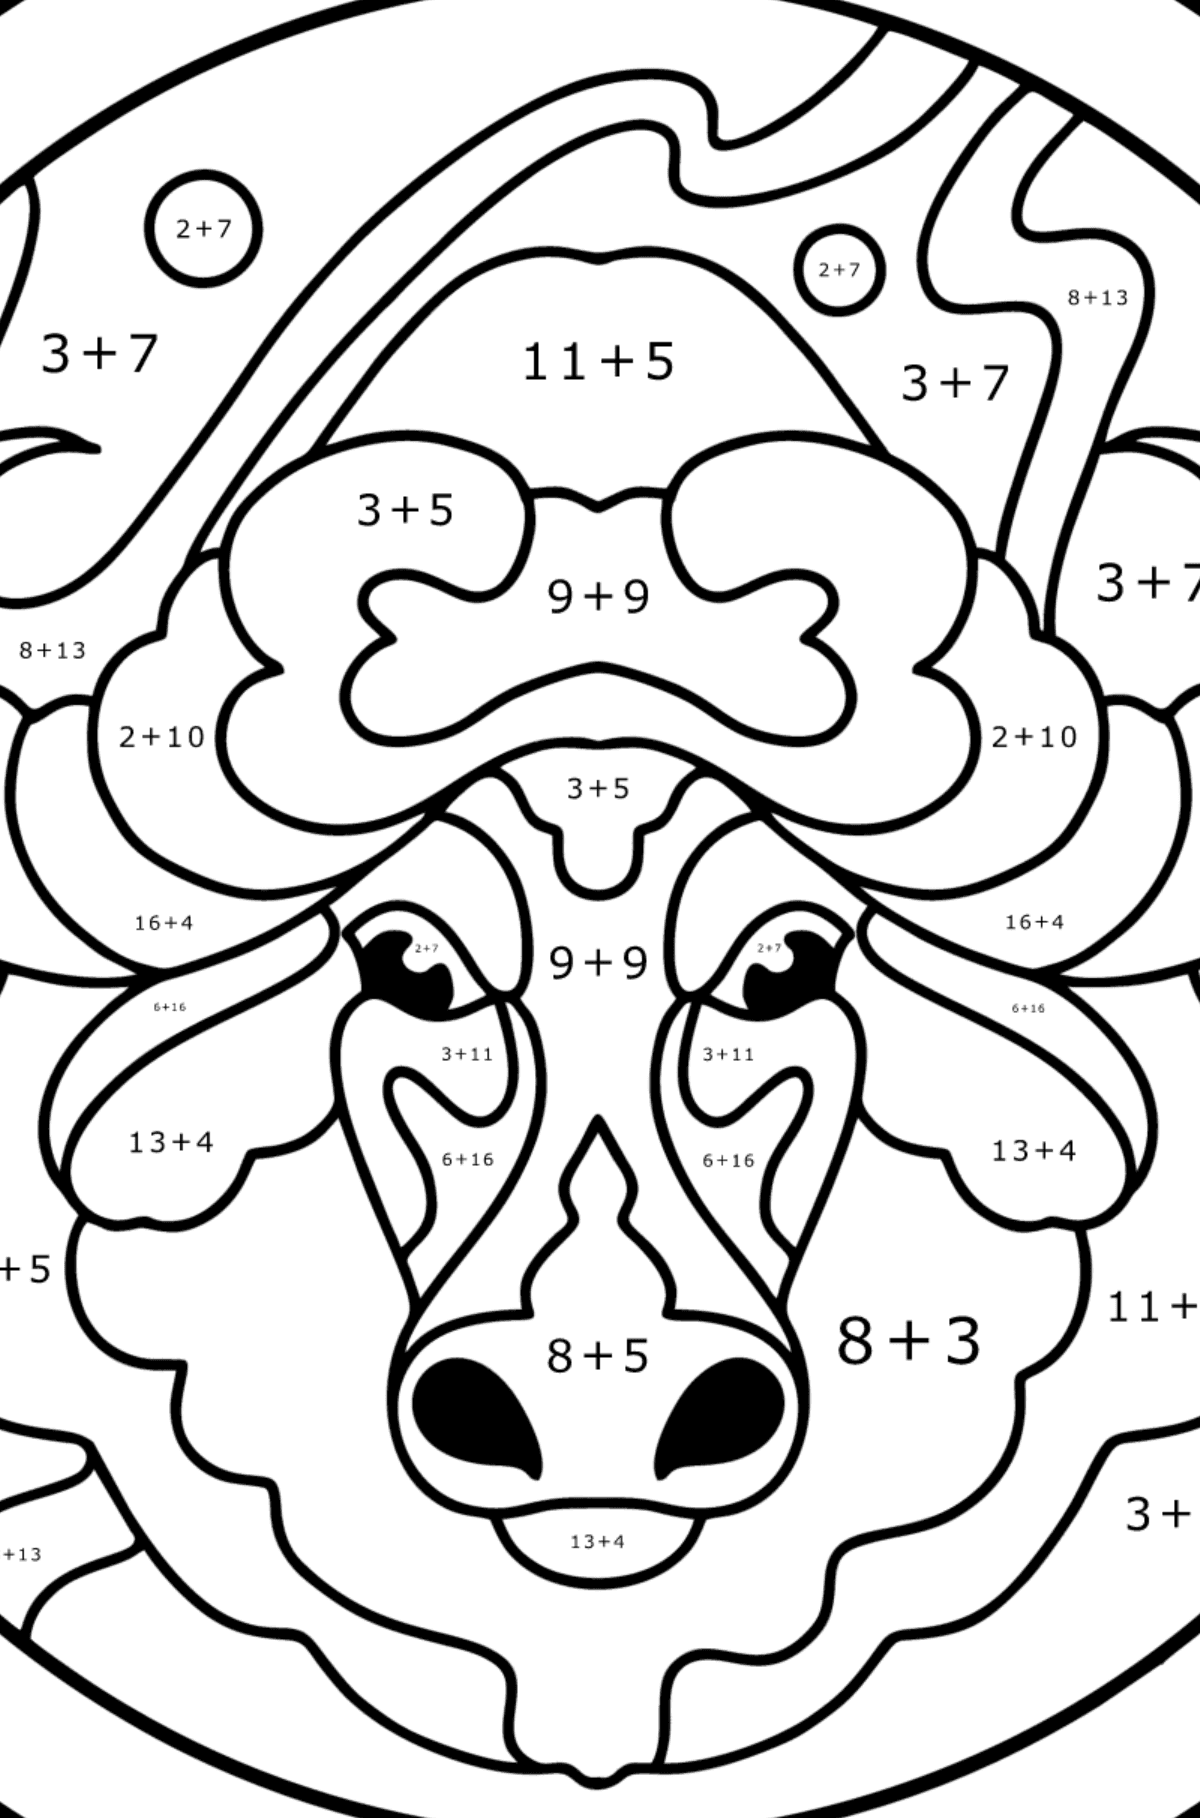 Coloring page for kids - zodiac sign Taurus - Math Coloring - Addition for Kids